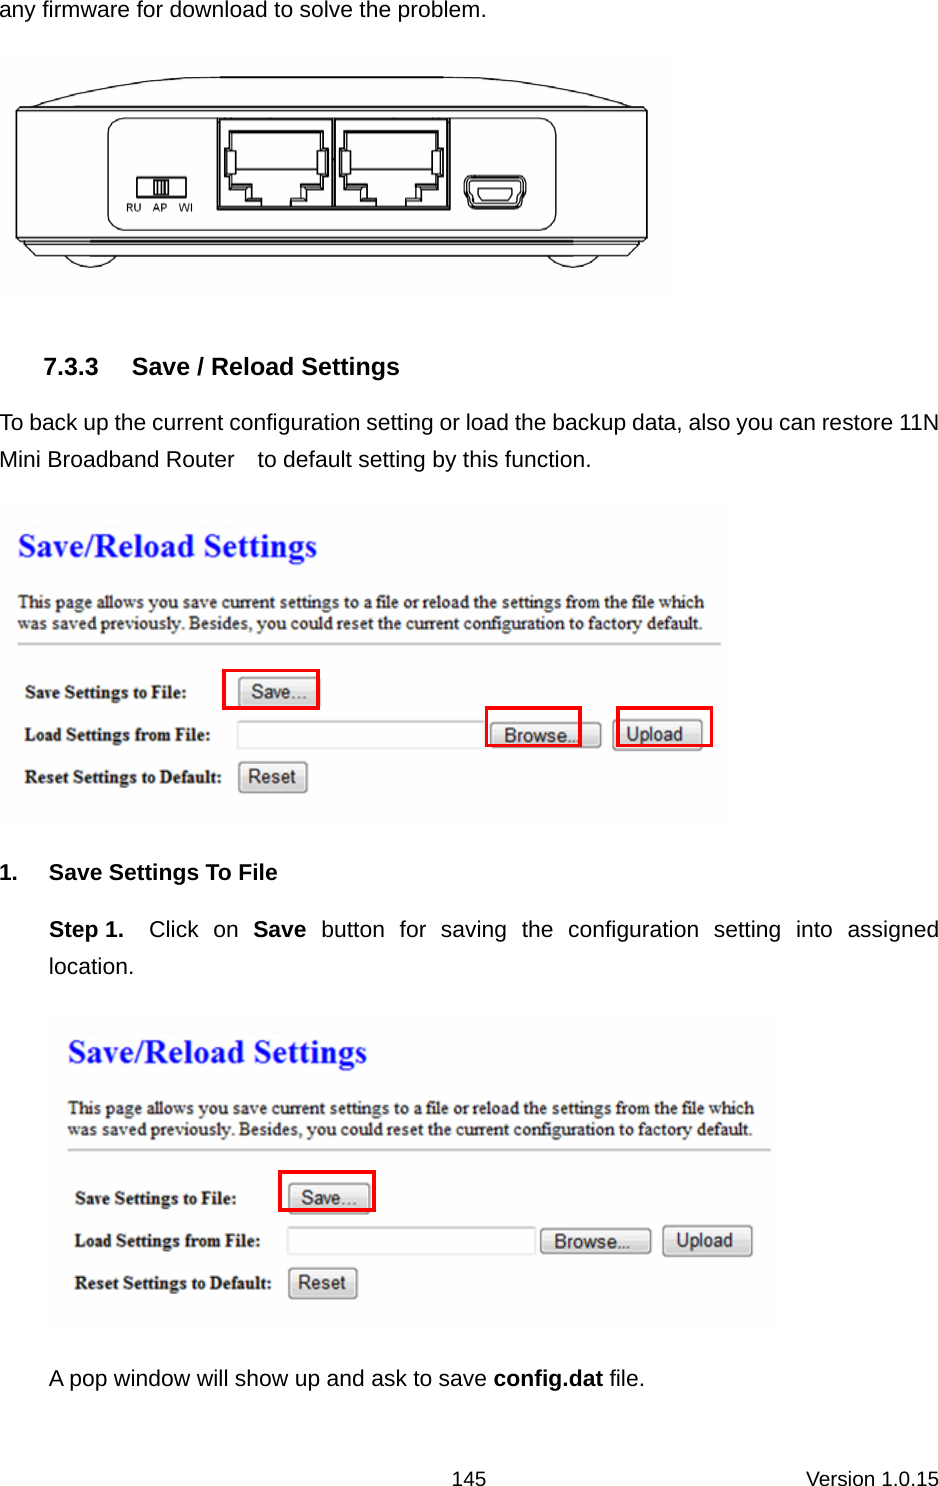 Version 1.0.15 145any firmware for download to solve the problem.  7.3.3  Save / Reload Settings To back up the current configuration setting or load the backup data, also you can restore 11N Mini Broadband Router    to default setting by this function.  1.  Save Settings To File Step 1.  Click on Save button for saving the configuration setting into assigned location.  A pop window will show up and ask to save config.dat file.   